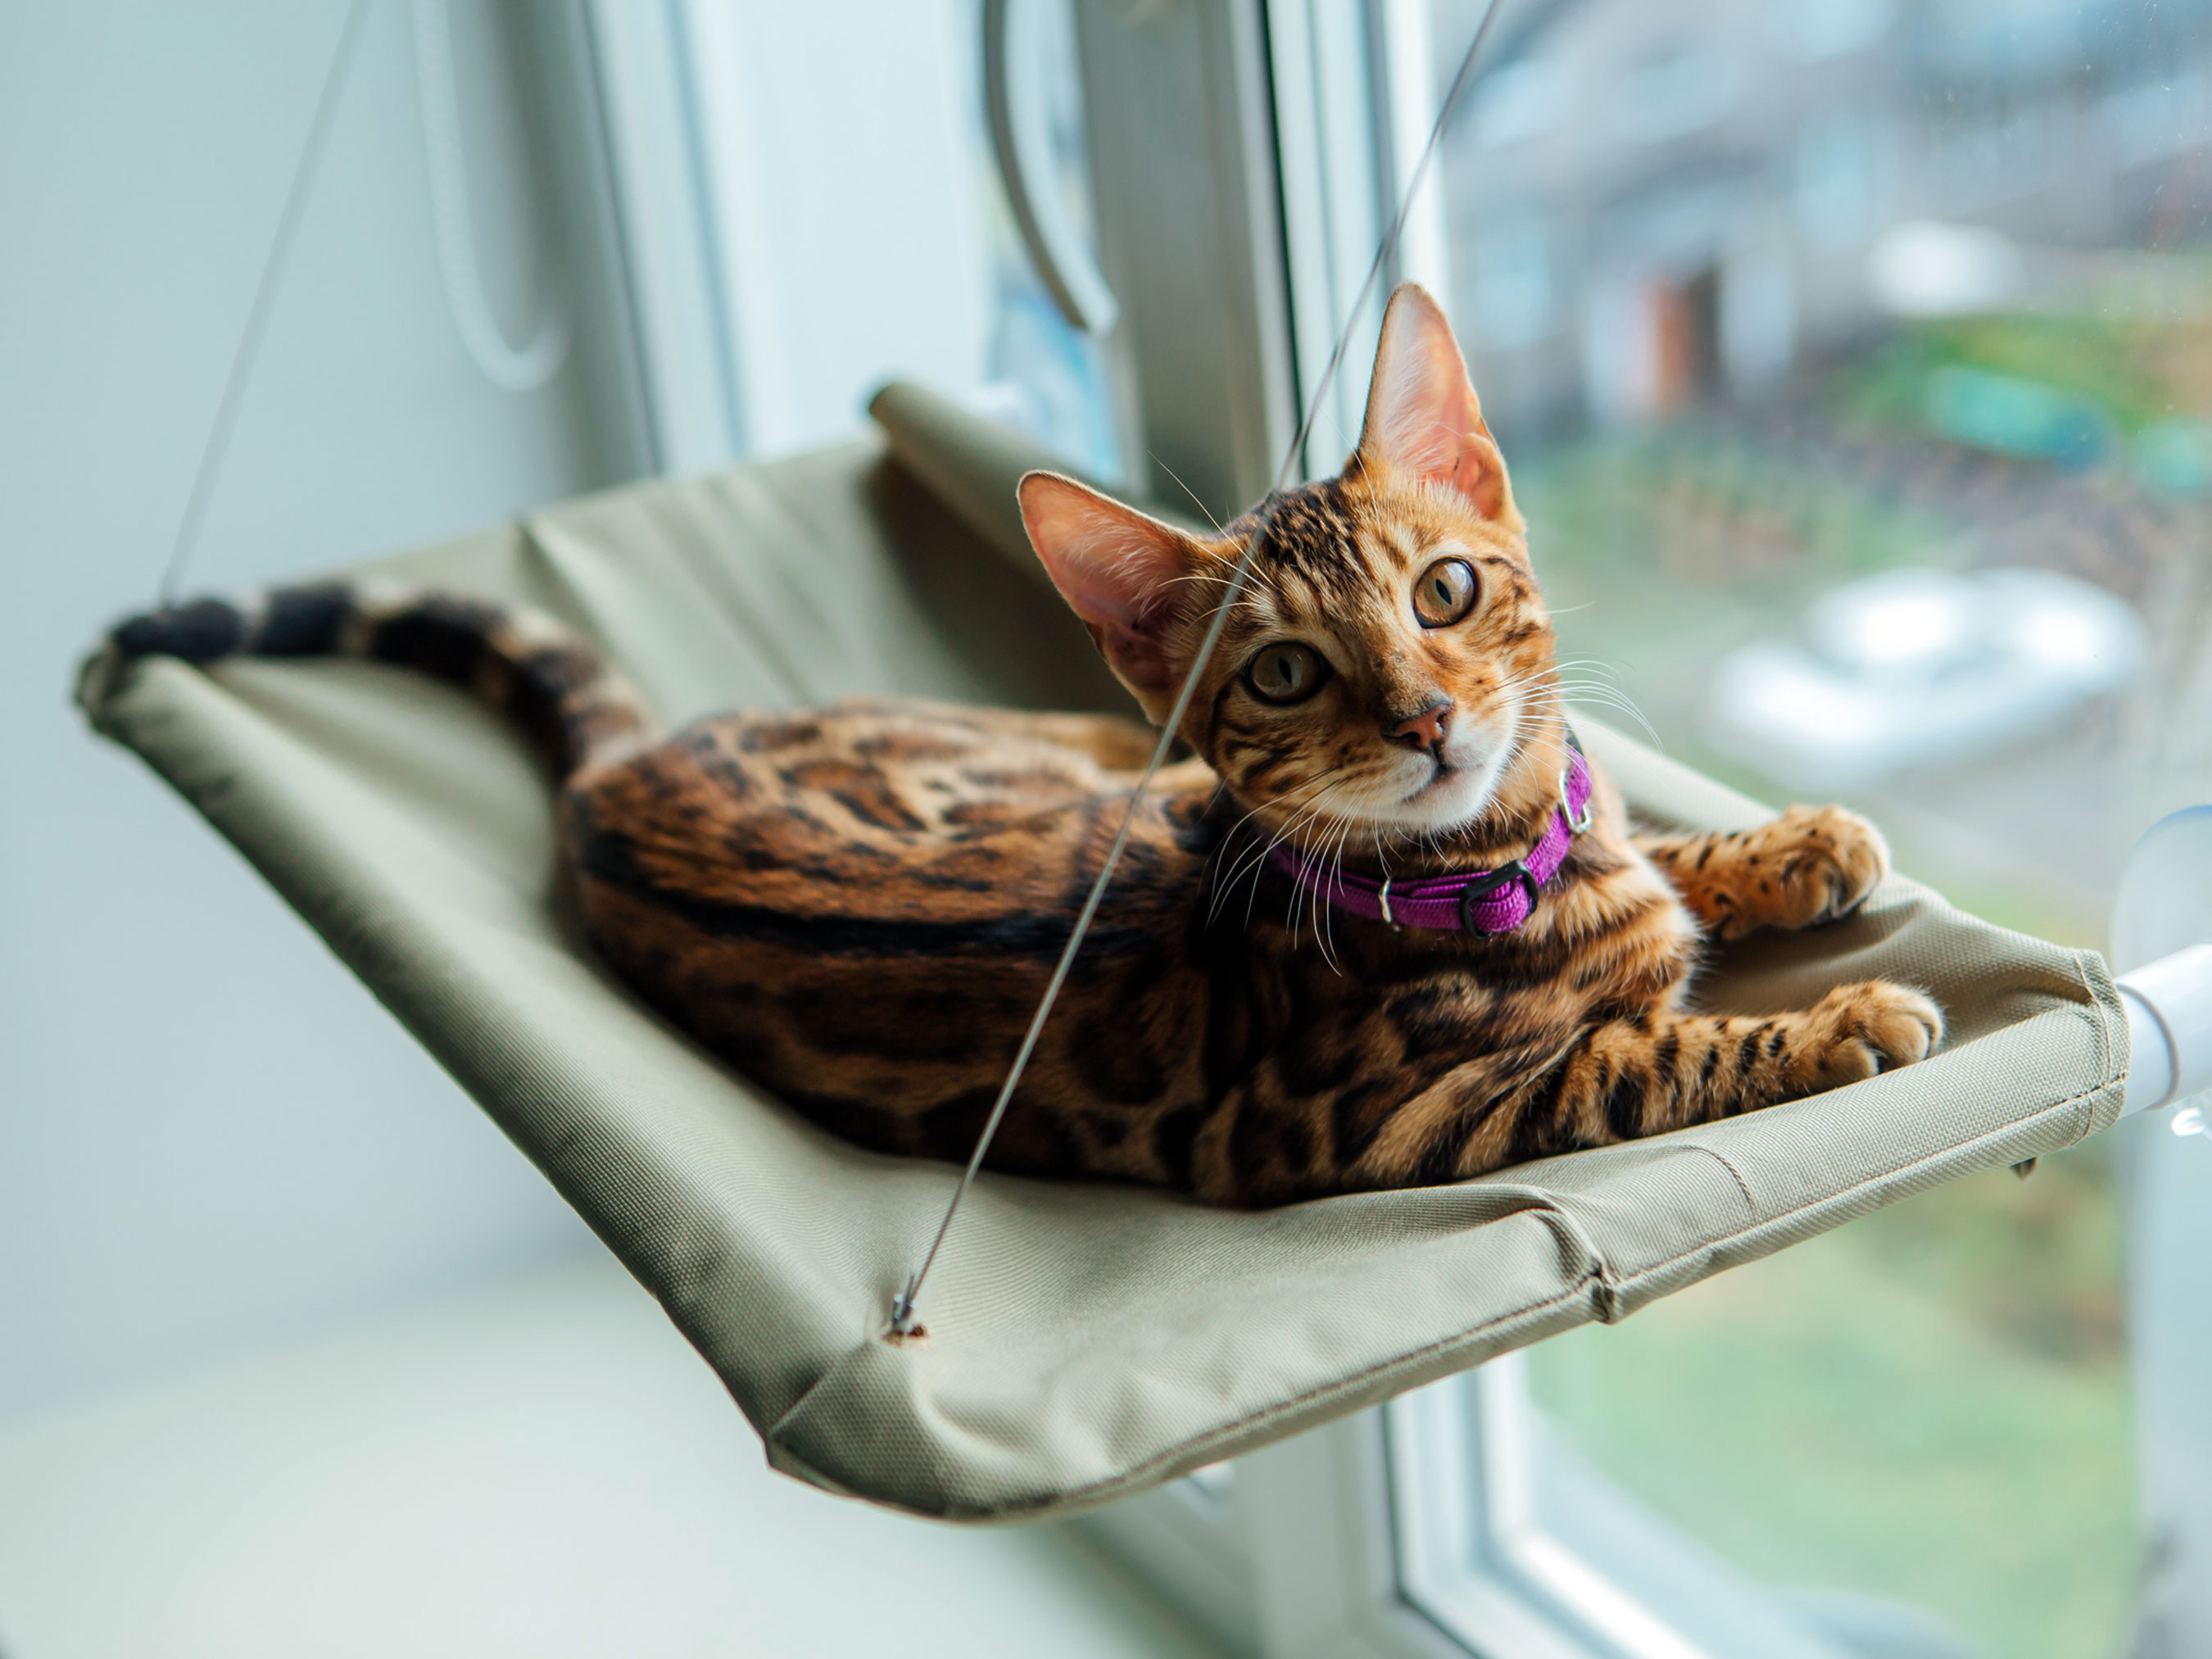 A beautiful Bengal cat lounging on her window perch.